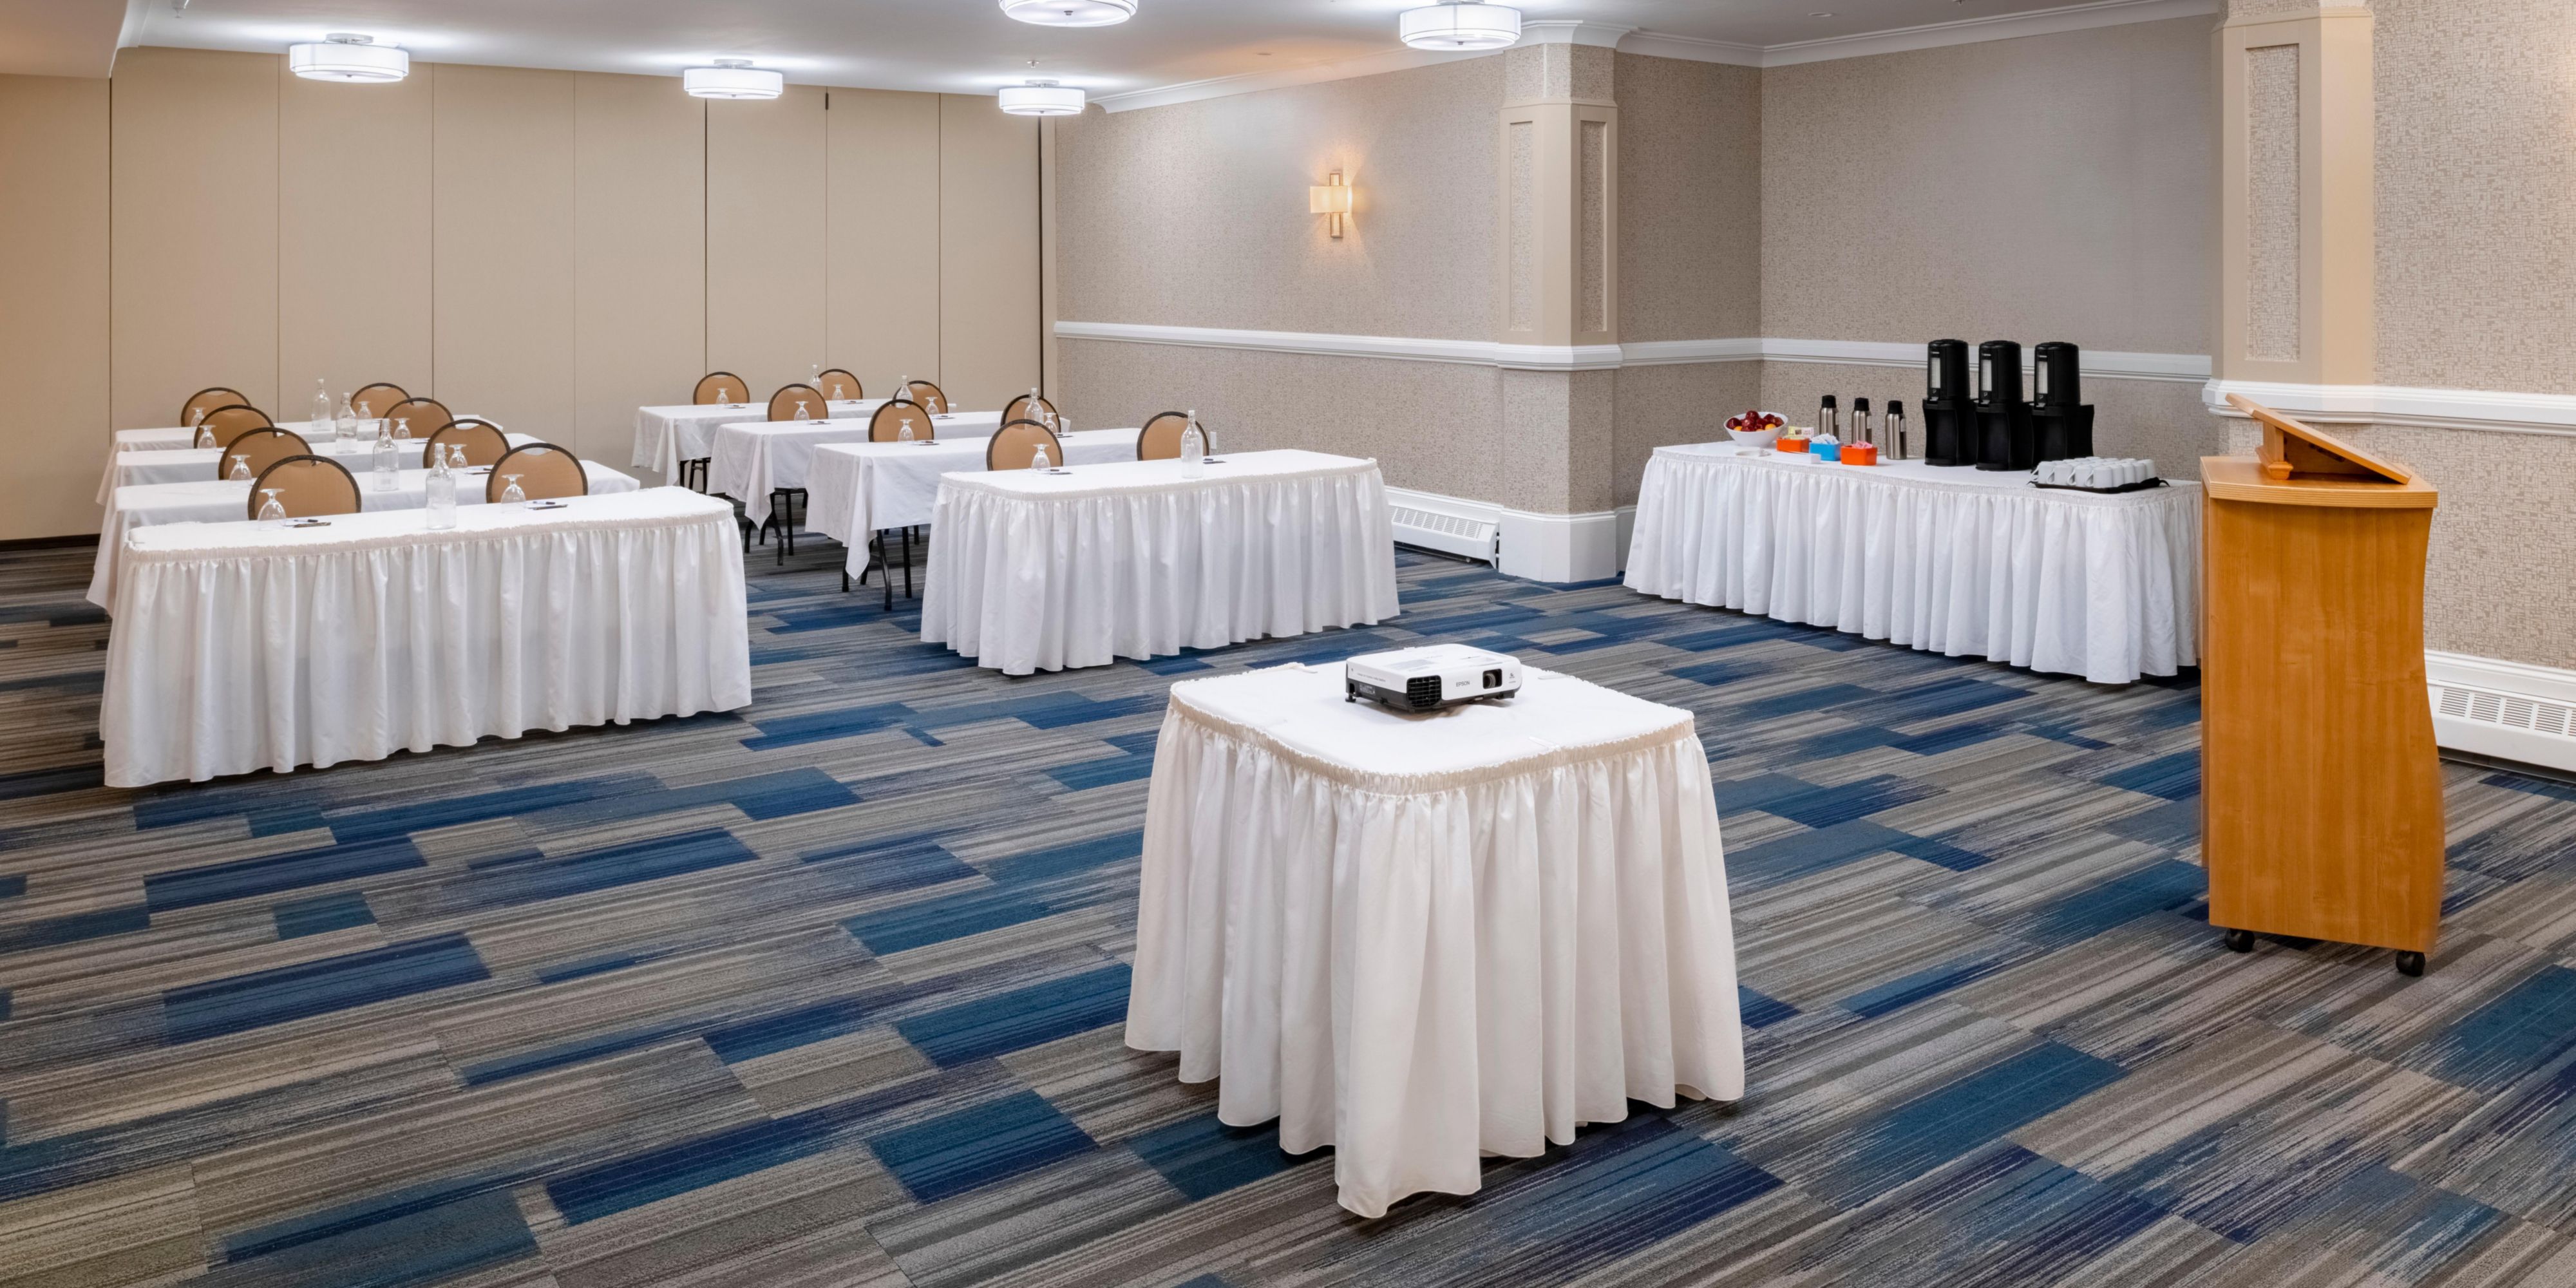 Are you looking to plan your next event or meeting? We have everything you need! From Corporate & Government Events and Meetings, Social Events, and so much more. Catering and guest room options are also available. All rooms include free breakfast, WI-FI, parking, and the indoor pool.